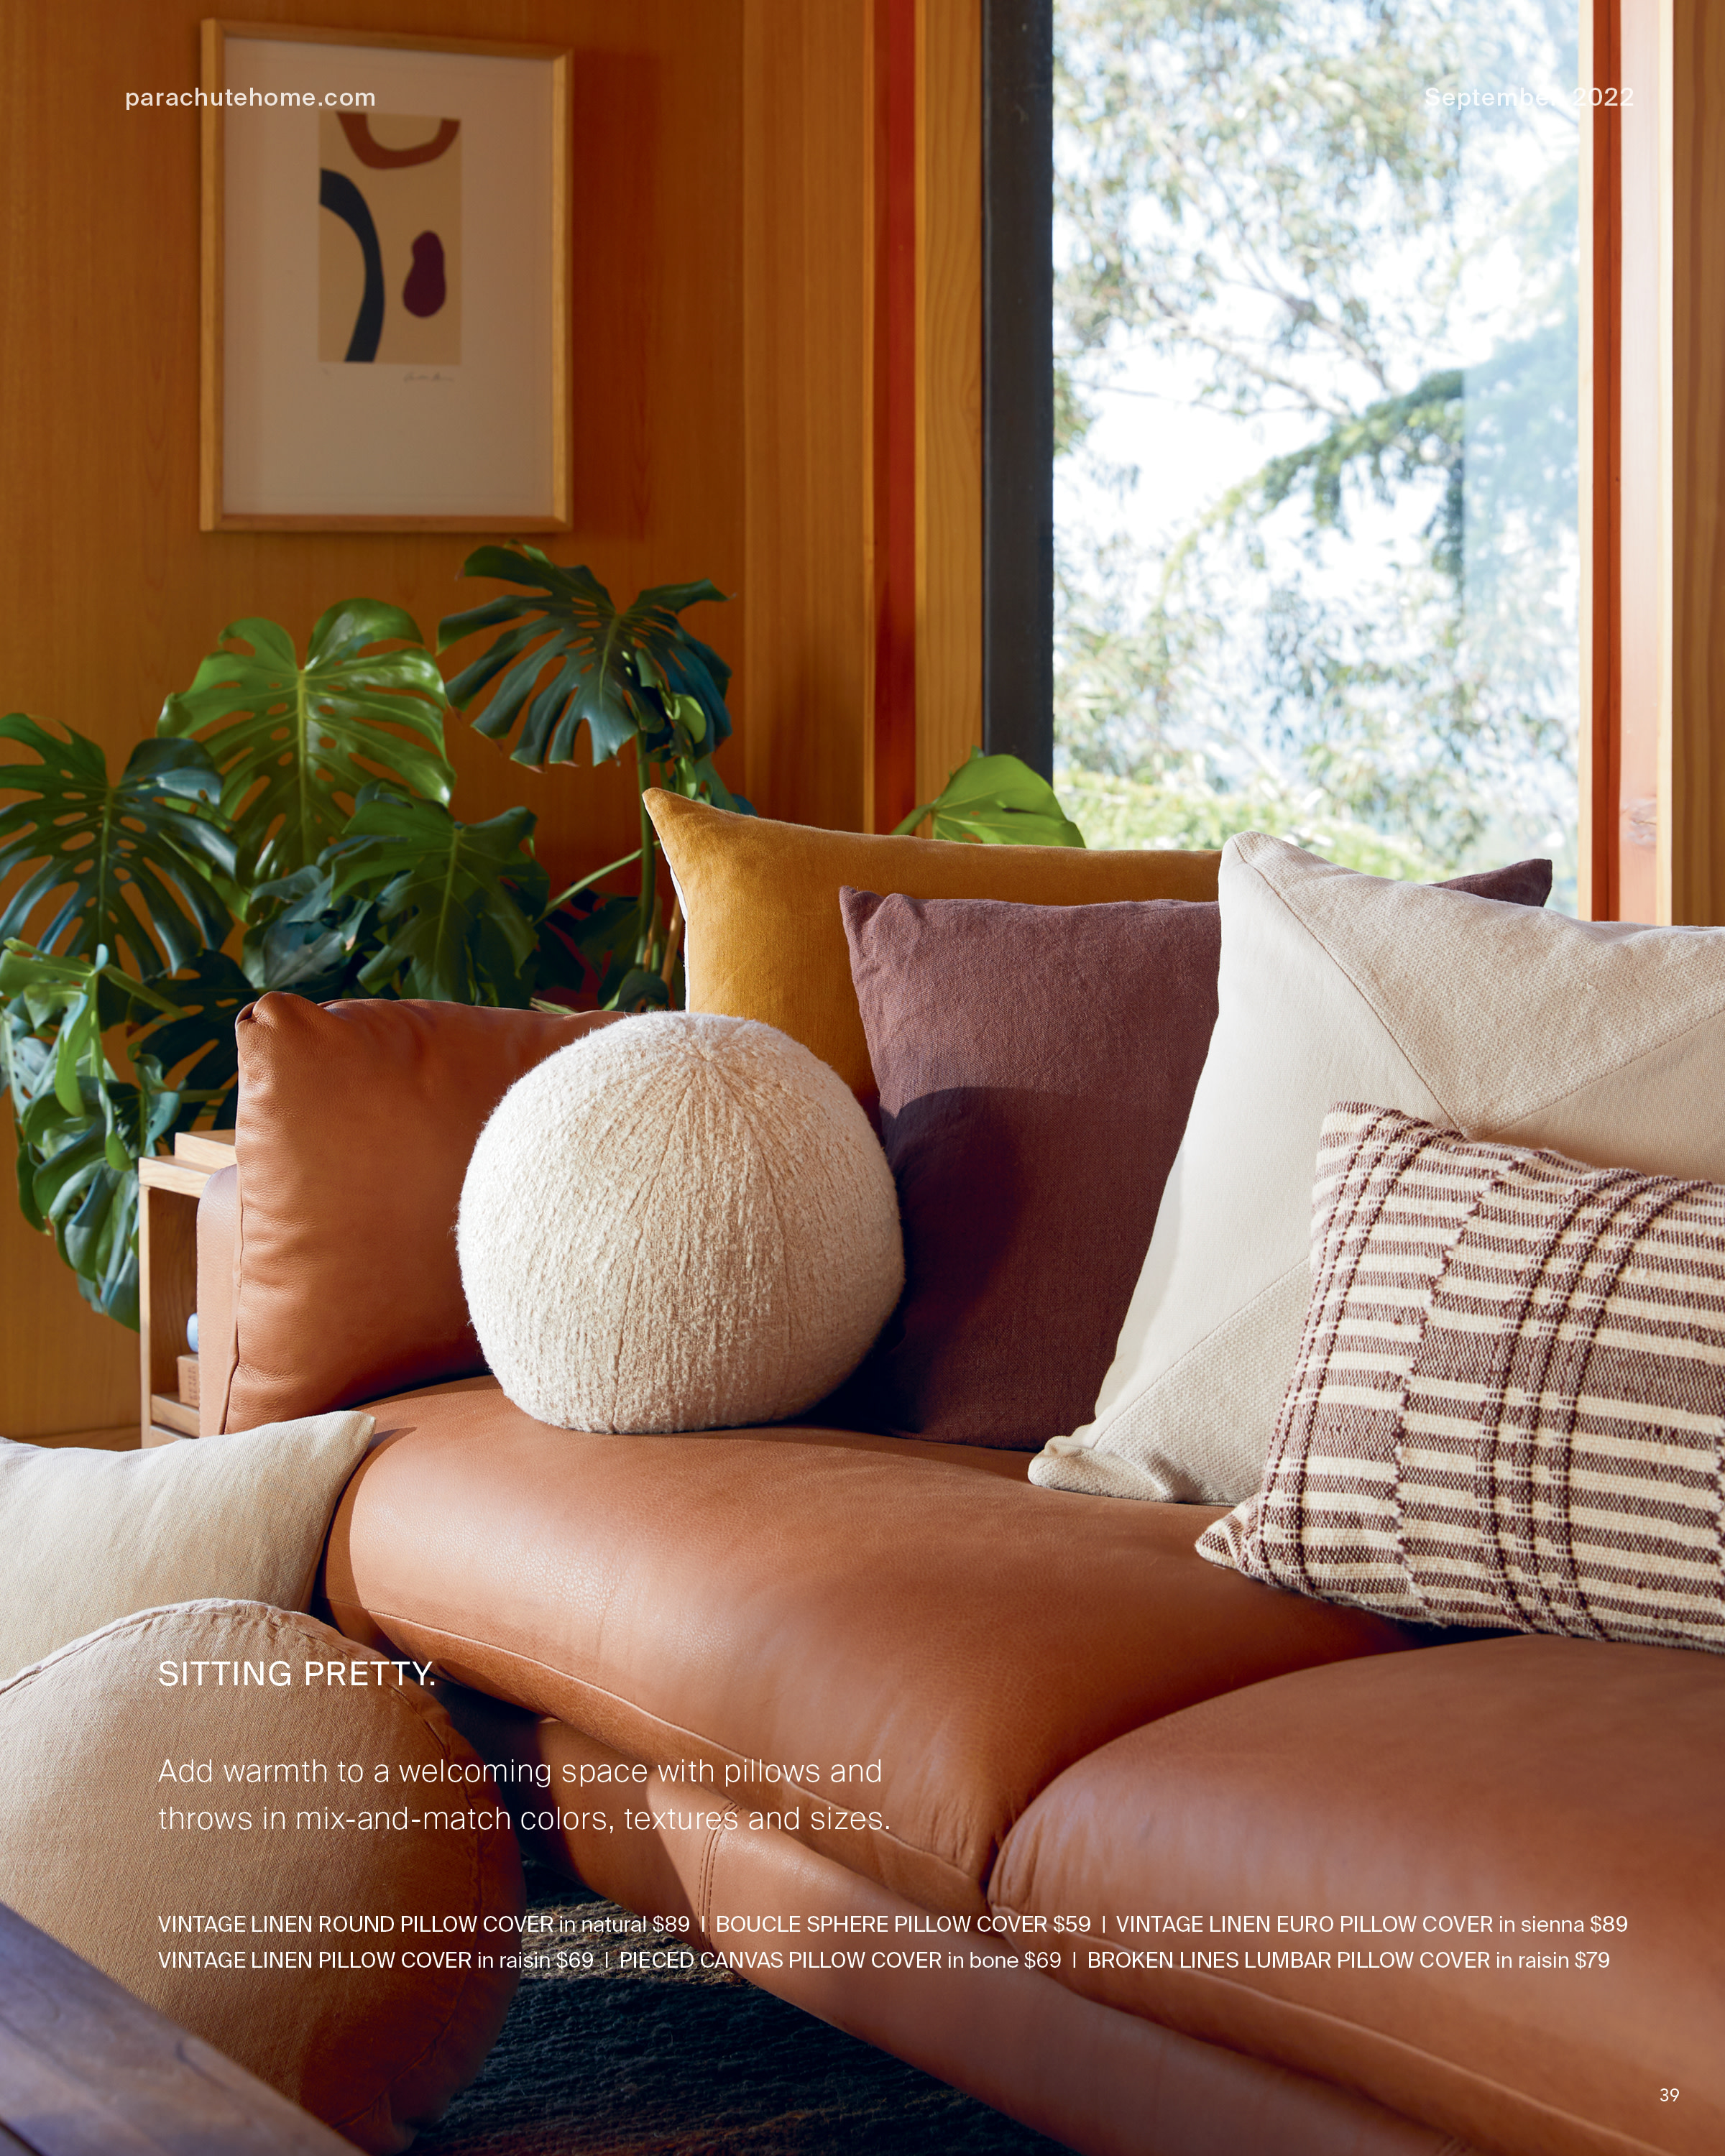 Pillows of various shapes and colors on a leather sofa